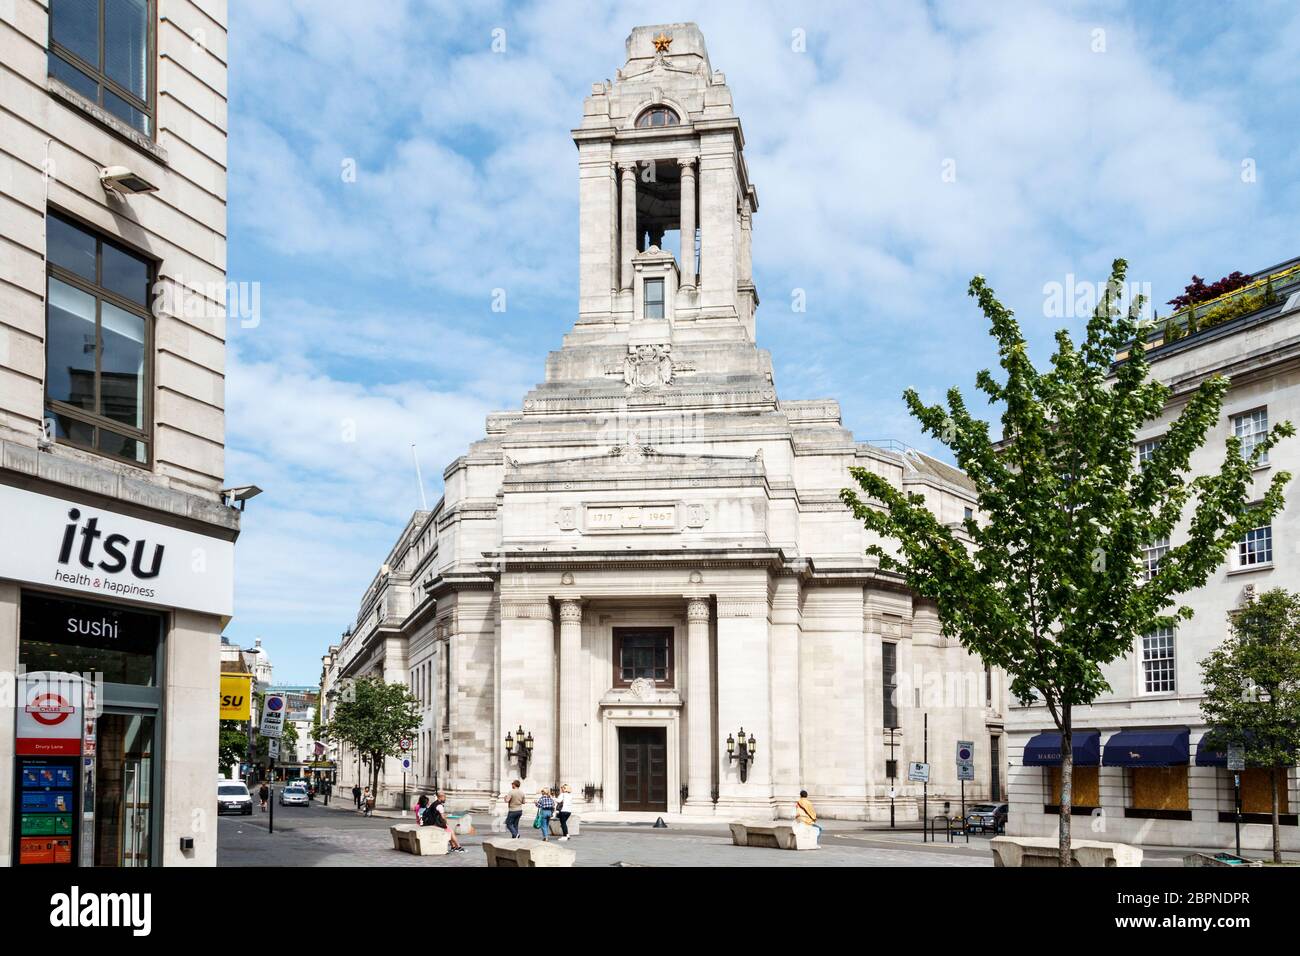 Freemasons' Hall, siège de l'United Grand Lodge of England, Great Queen Street, Londres, Royaume-Uni Banque D'Images